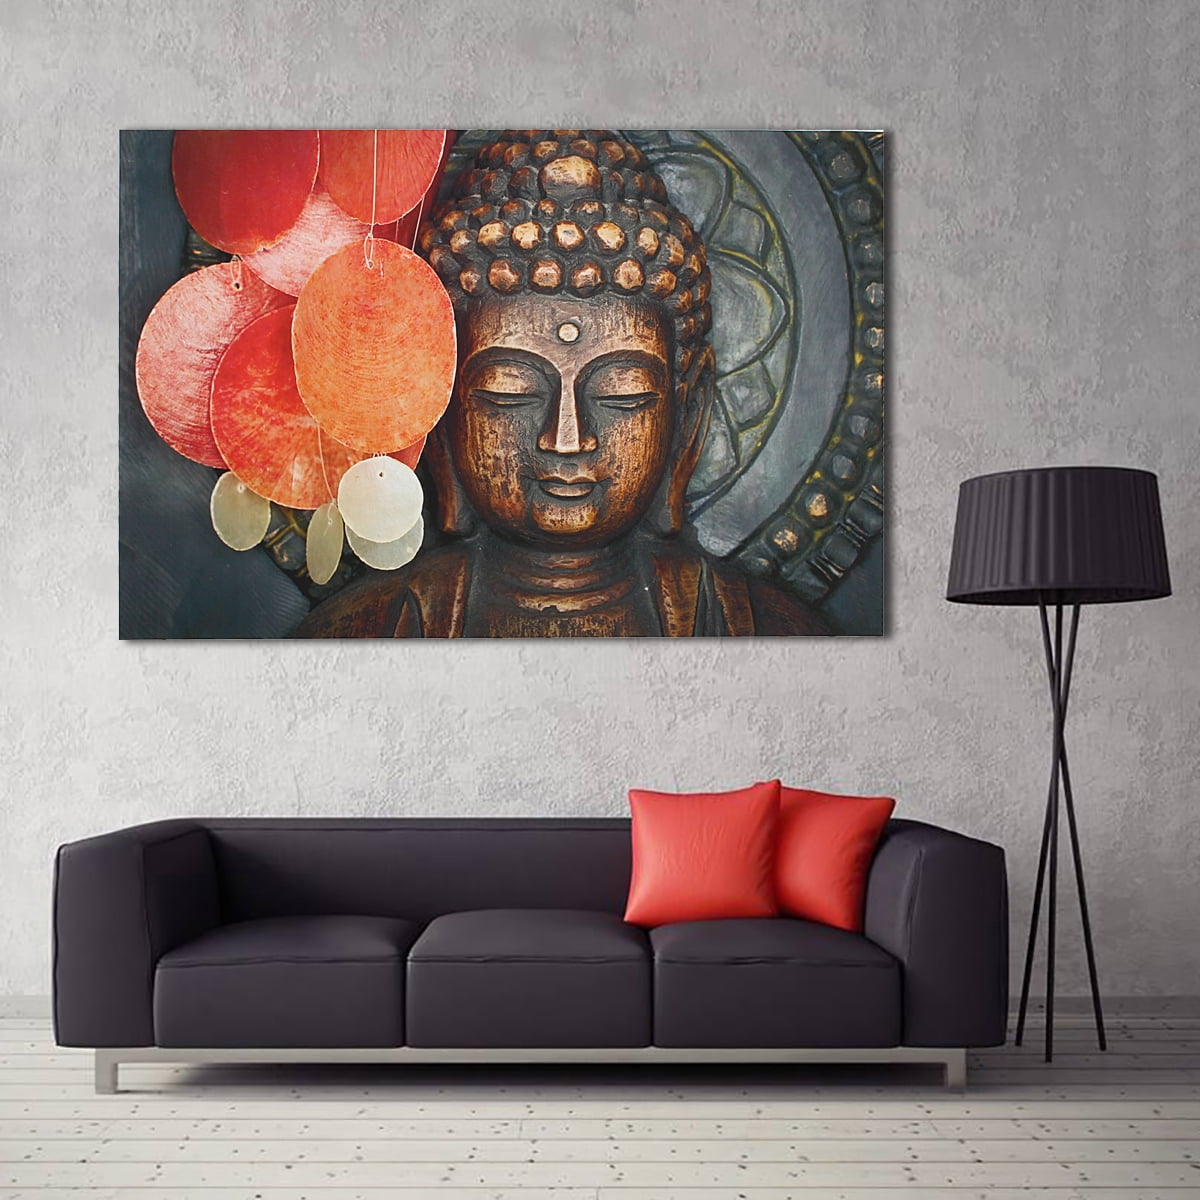 BUDDHA AND FLOWERS CANVAS WALL ART PICTURES HOME DECORATION PRINTS PHOTO IMAGES 